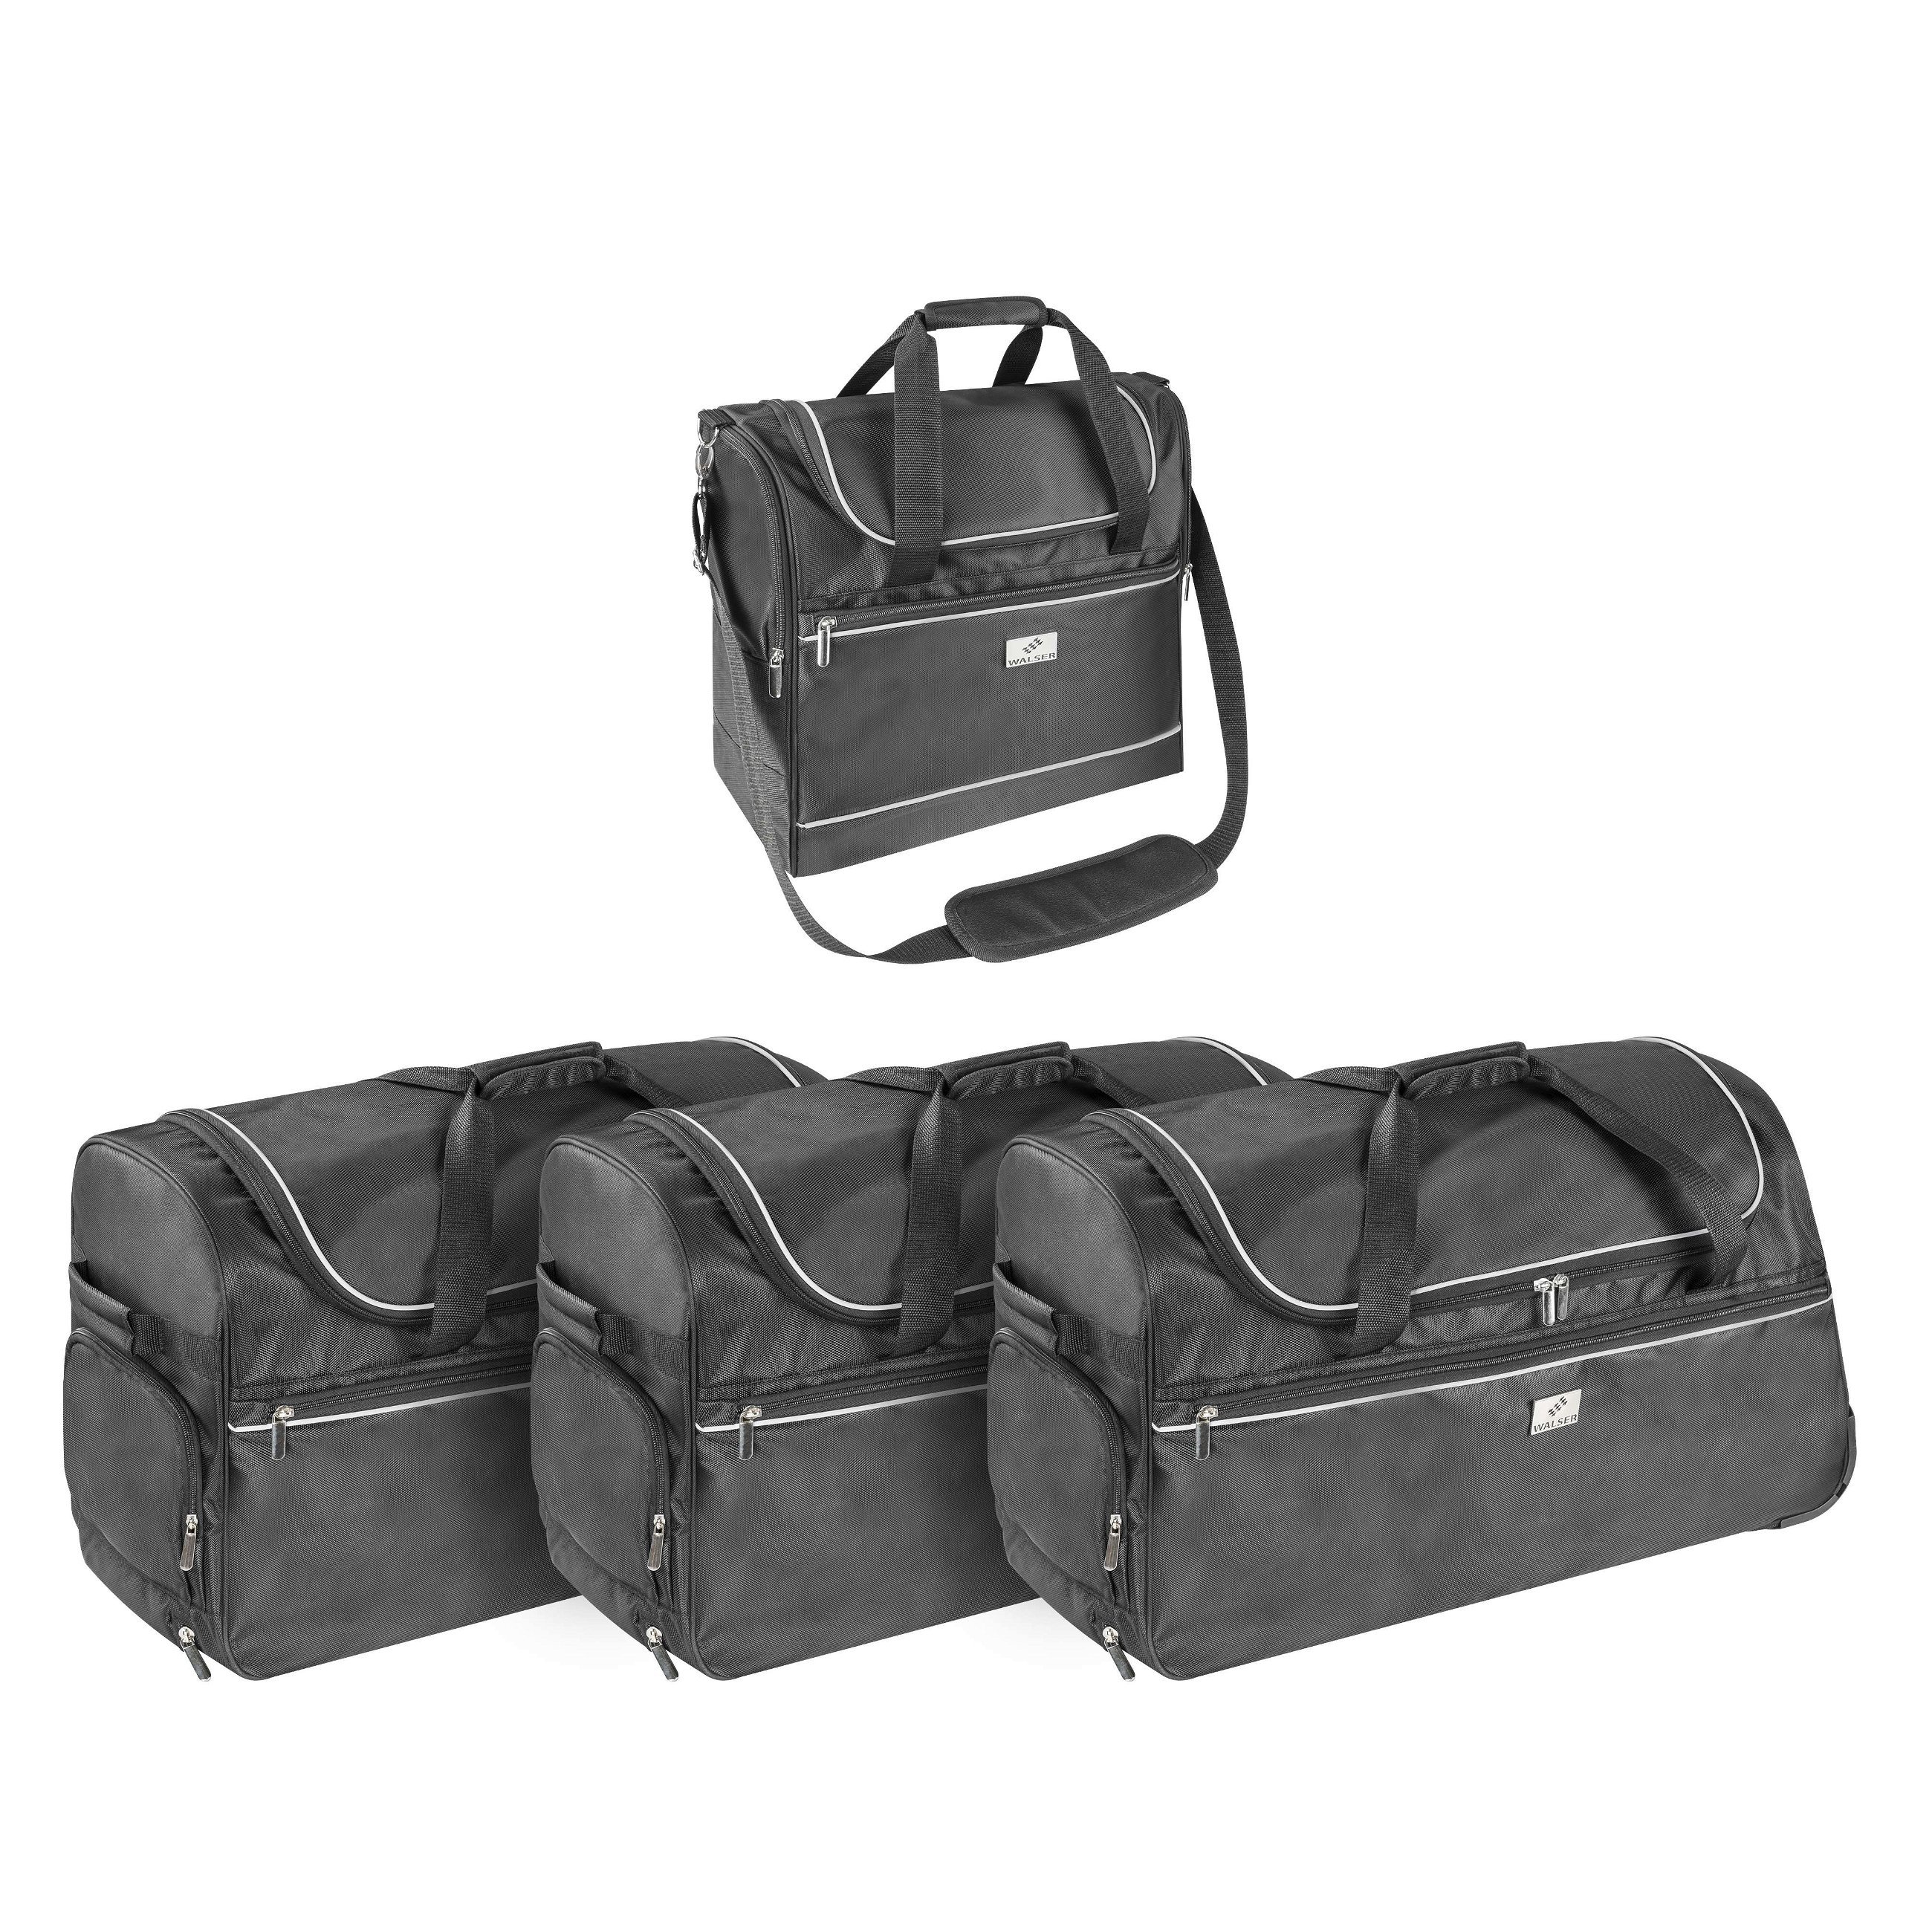 Carbags Travel Bag Set for BMW X3 G01 black